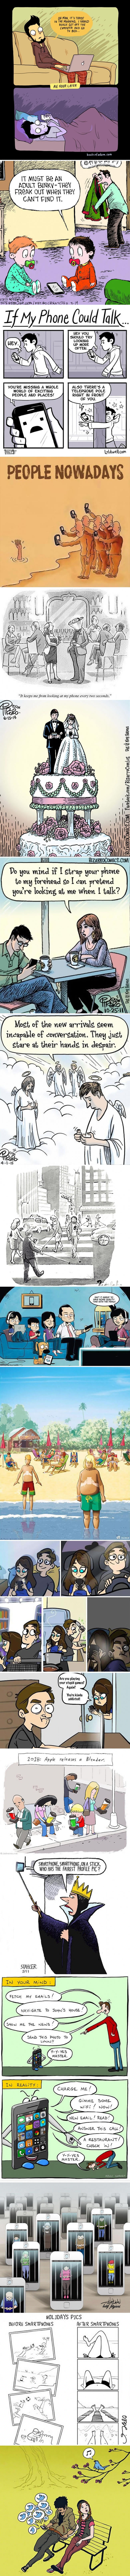 19 Comics That Show You How Smartphones Have Taken Over Our Lives